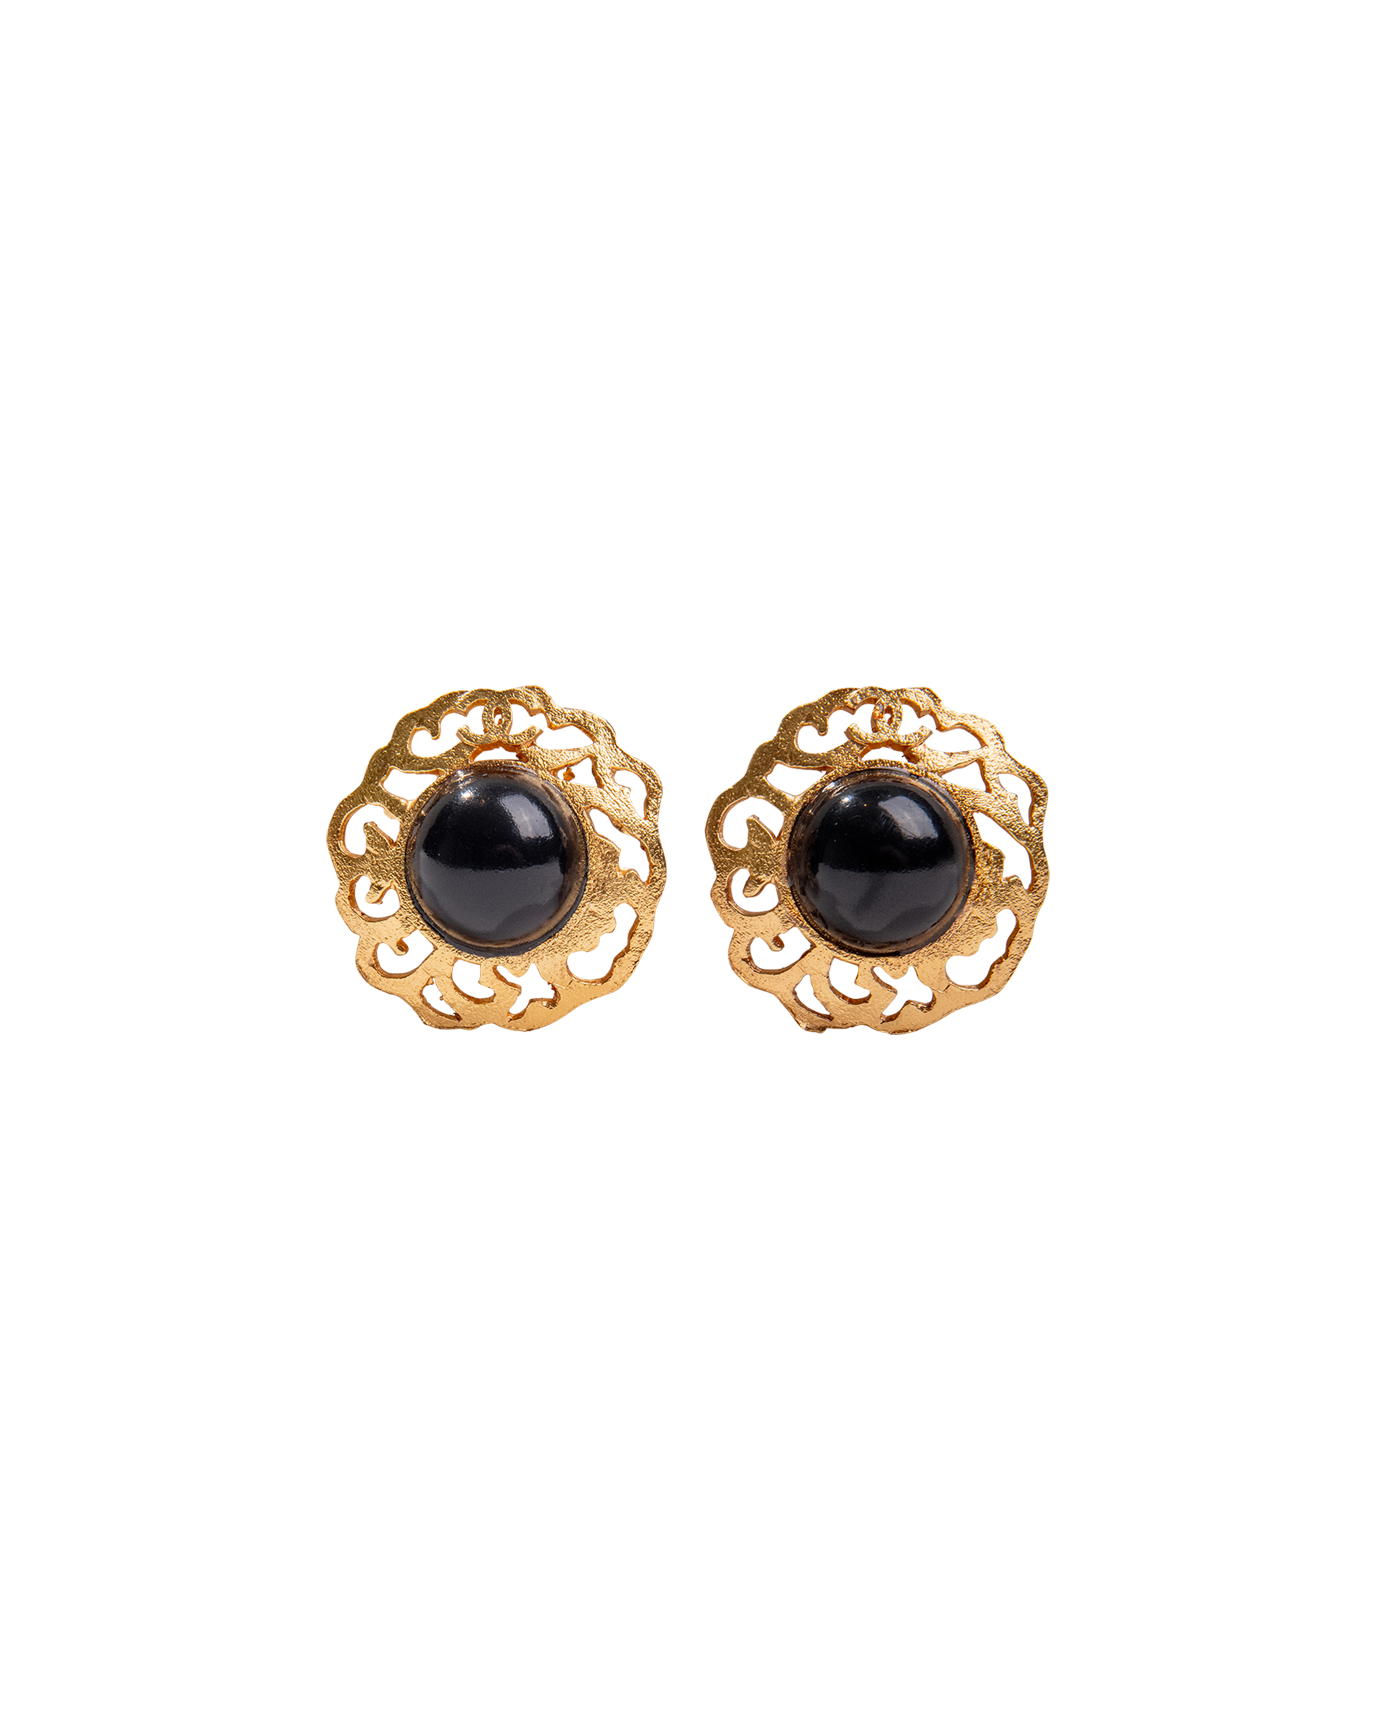 1980's Gold Filigree Clip-on Earrings with Black Gemstone Center